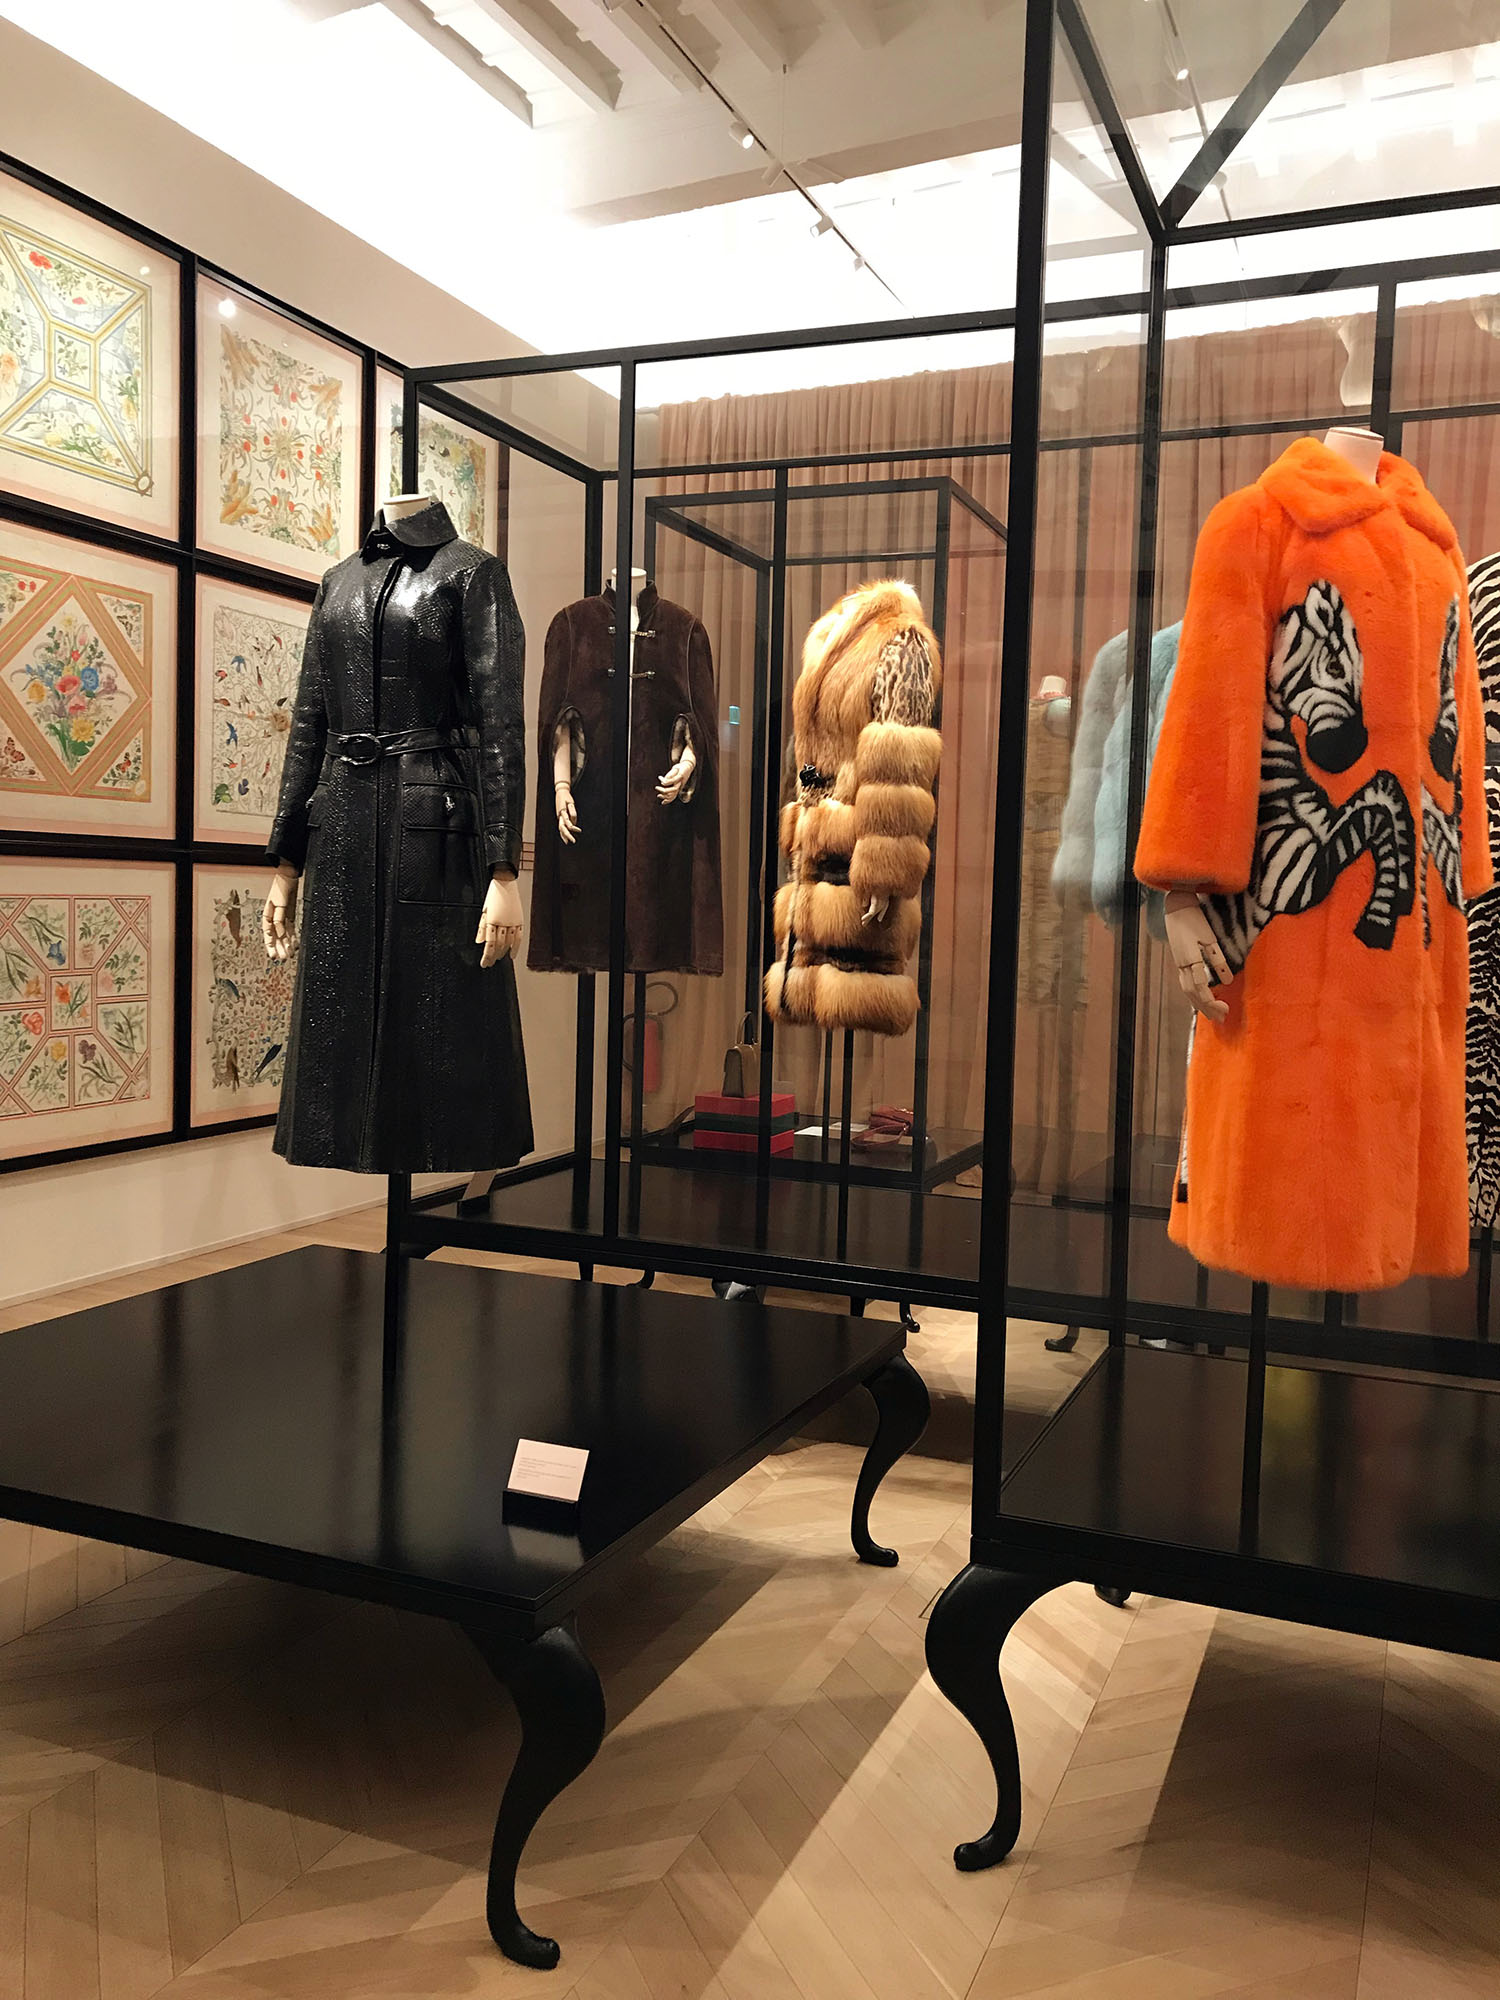 Coco & Vera - Coats at the Gucci Museum in Florence, Italy